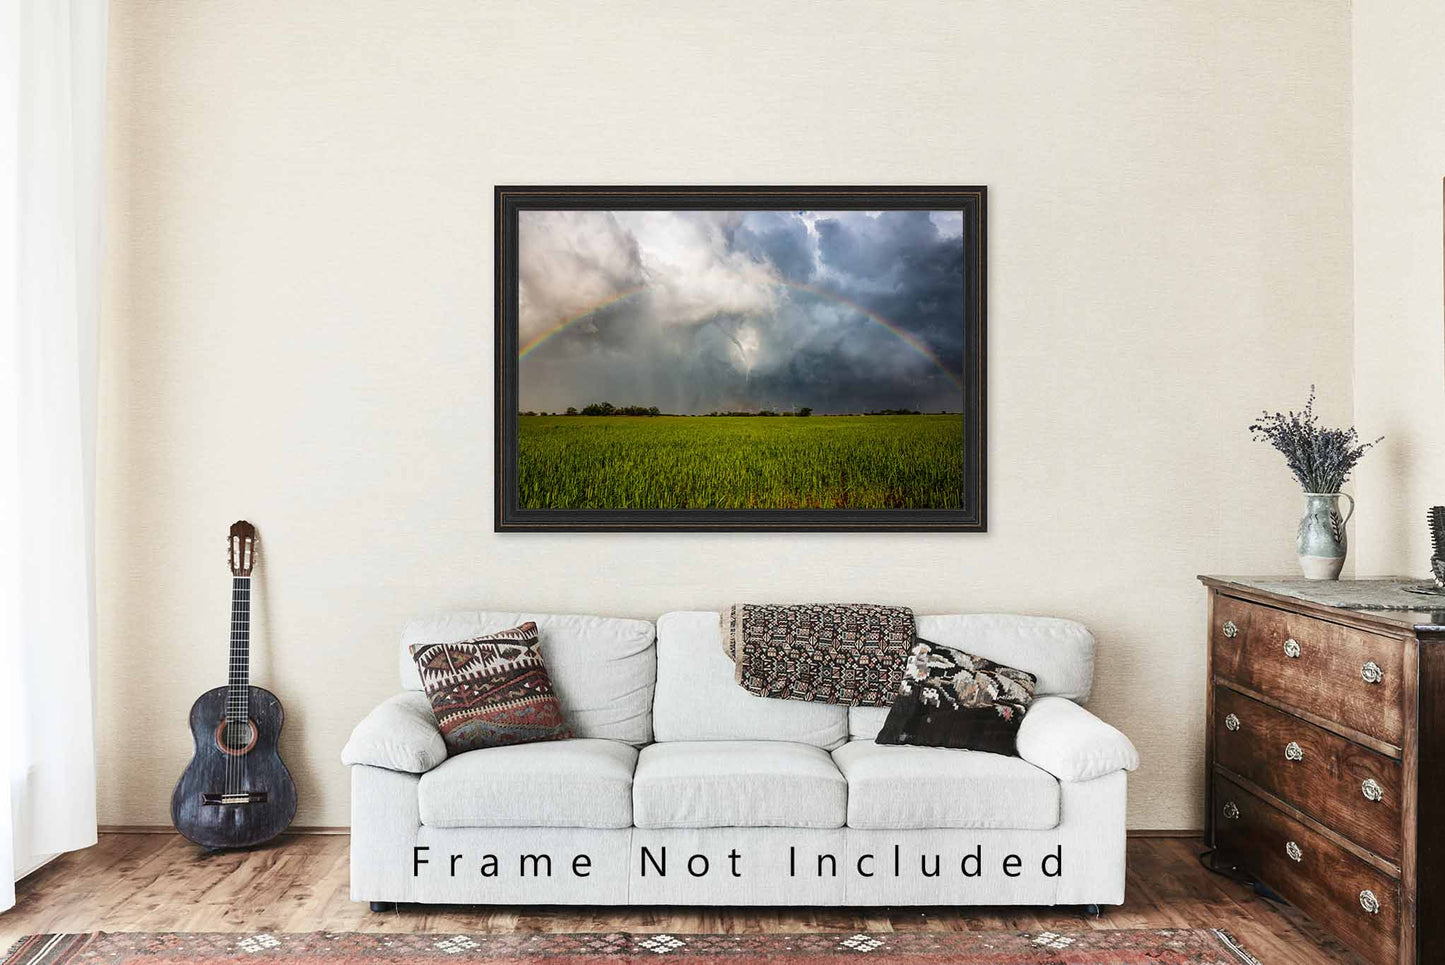 Storm Photography Print - Picture of Tornado Under Full Rainbow on Stormy Spring Day in Texas - Nature Wall Art Weather Photo Artwork Decor